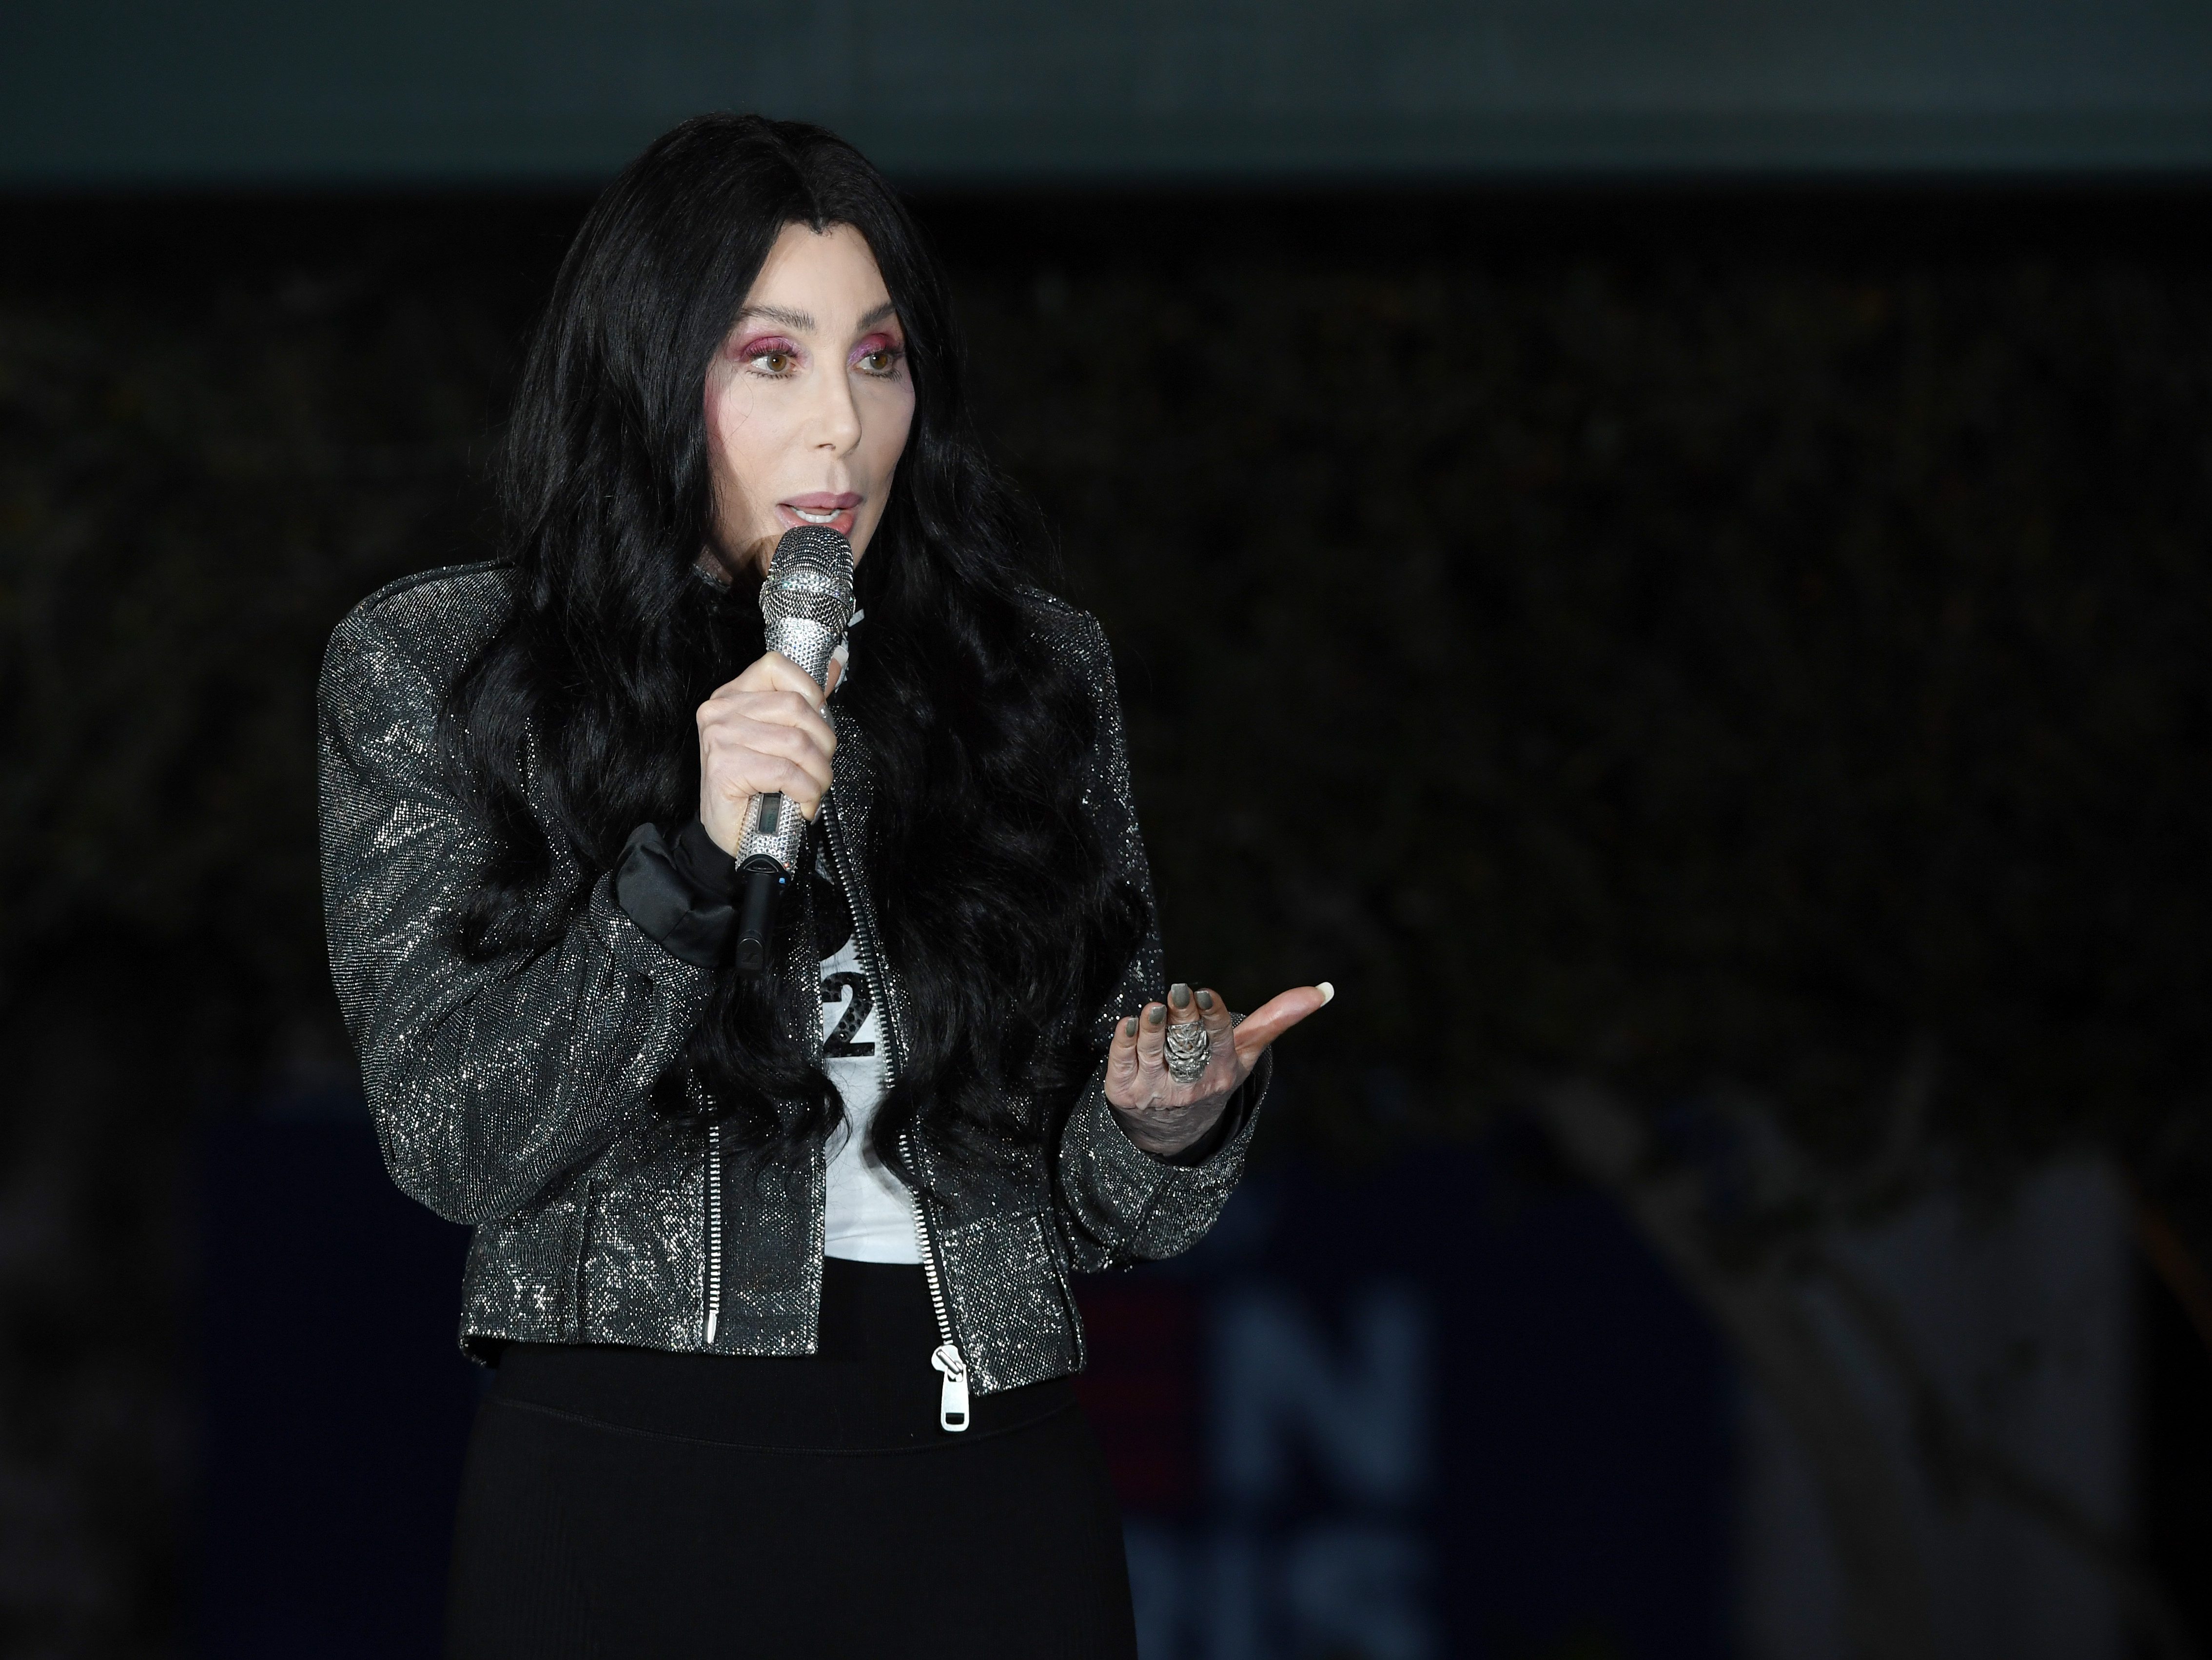 Cher speaks during a rally at a residential shopping center on October 24, 2020 in Las Vegas, Nevada | Source: Getty Images